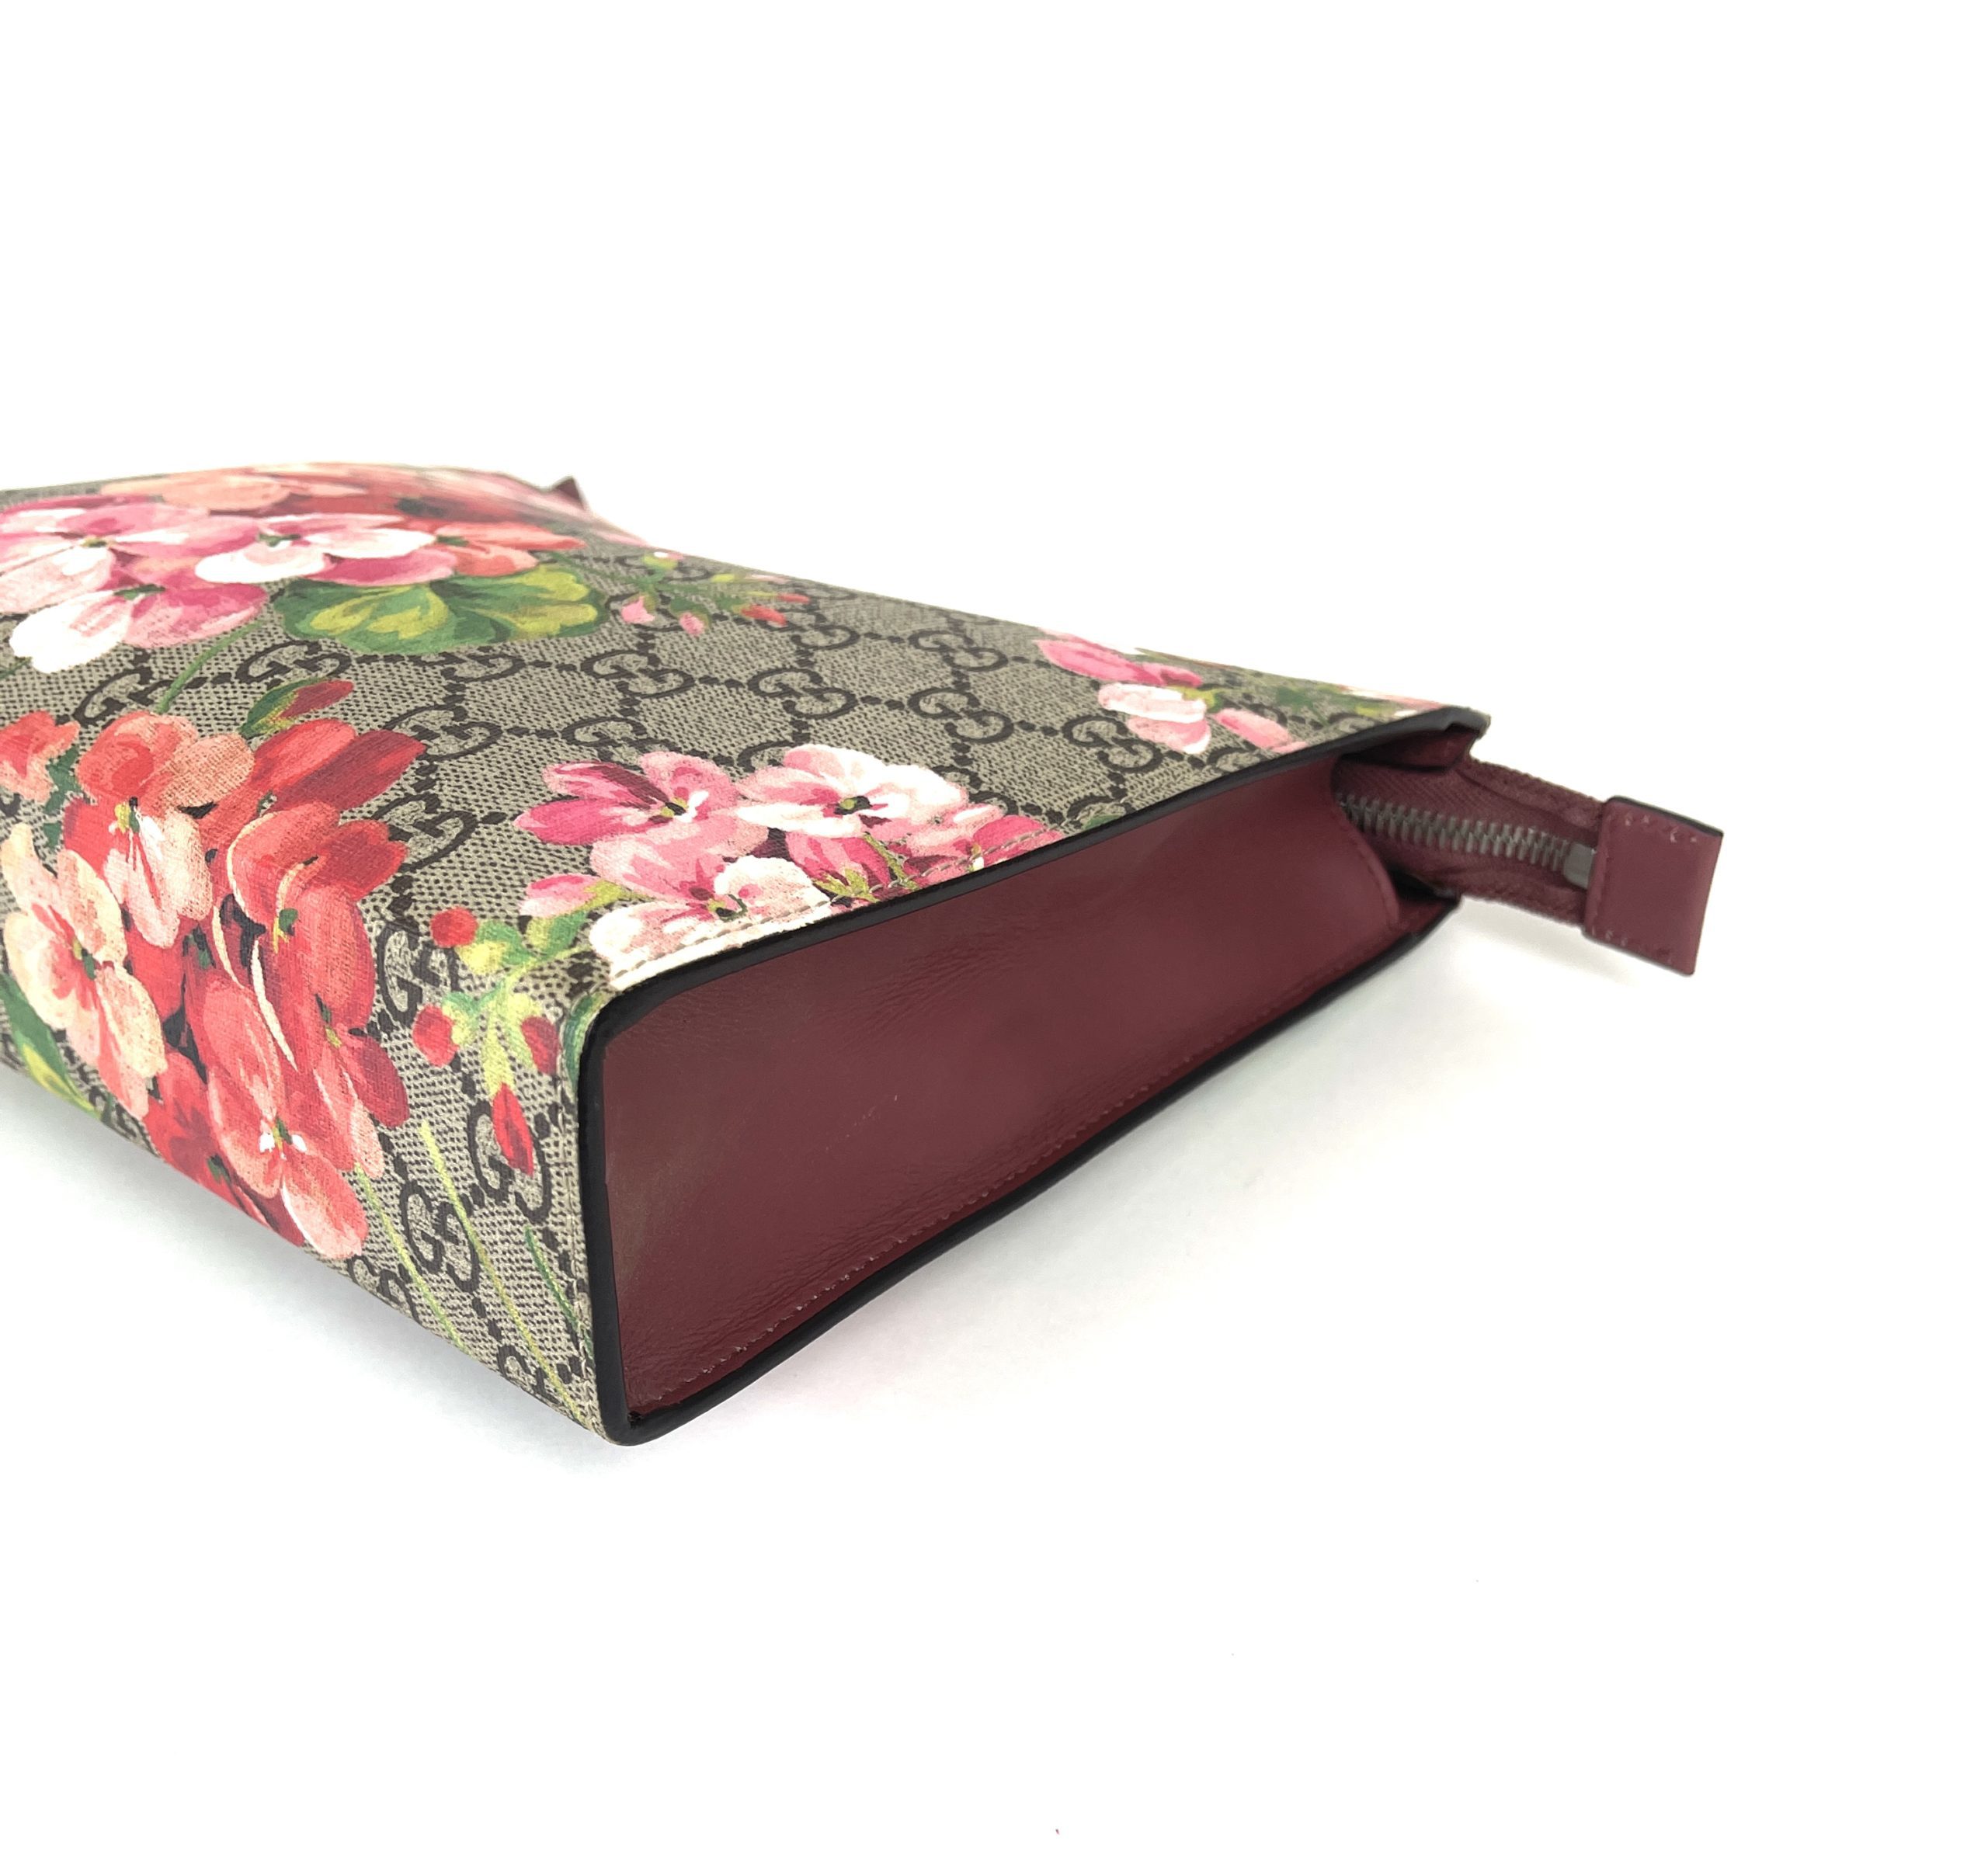 Gucci GG Blooms Large Cosmetic Case - Farfetch